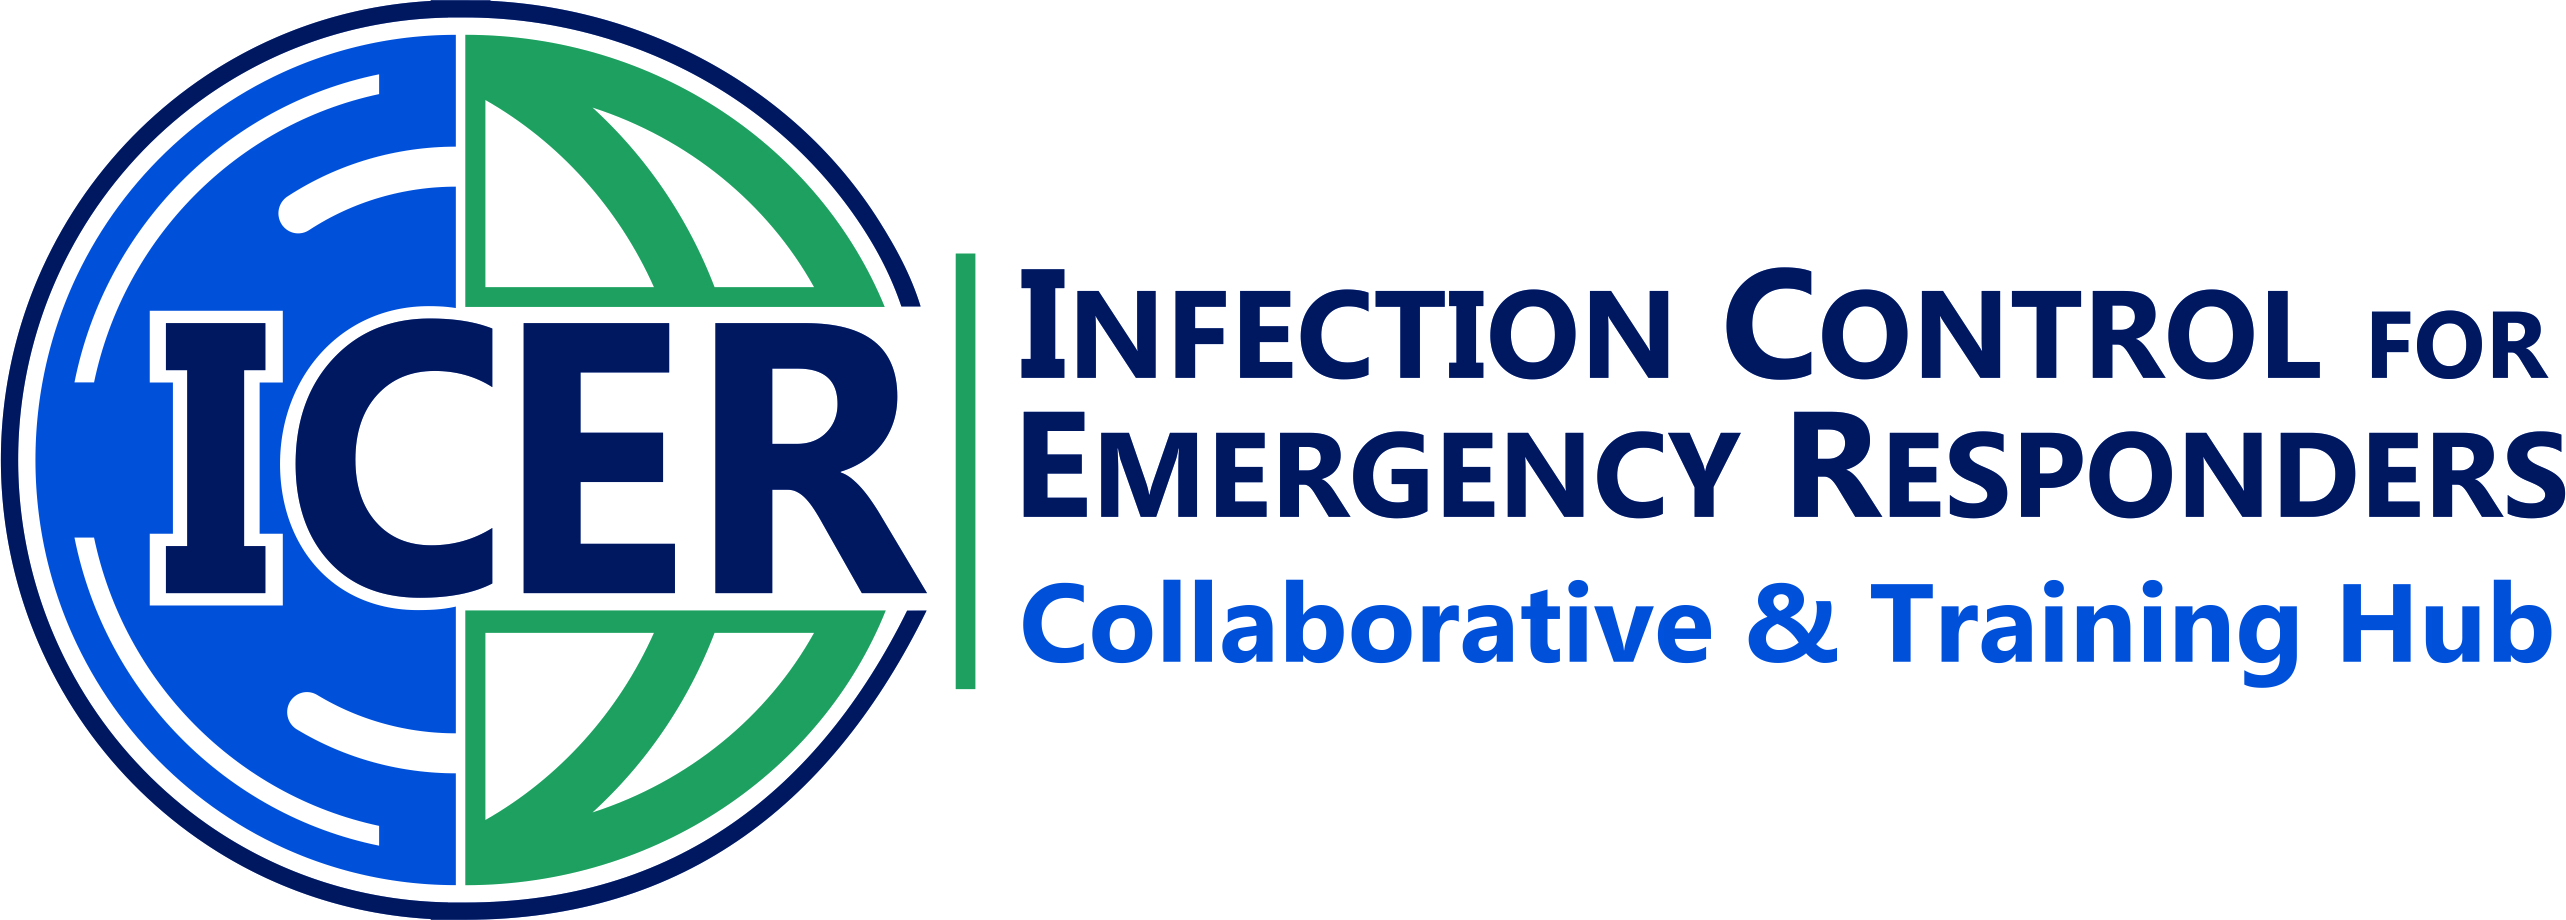 Infection Control for Emergency Responders